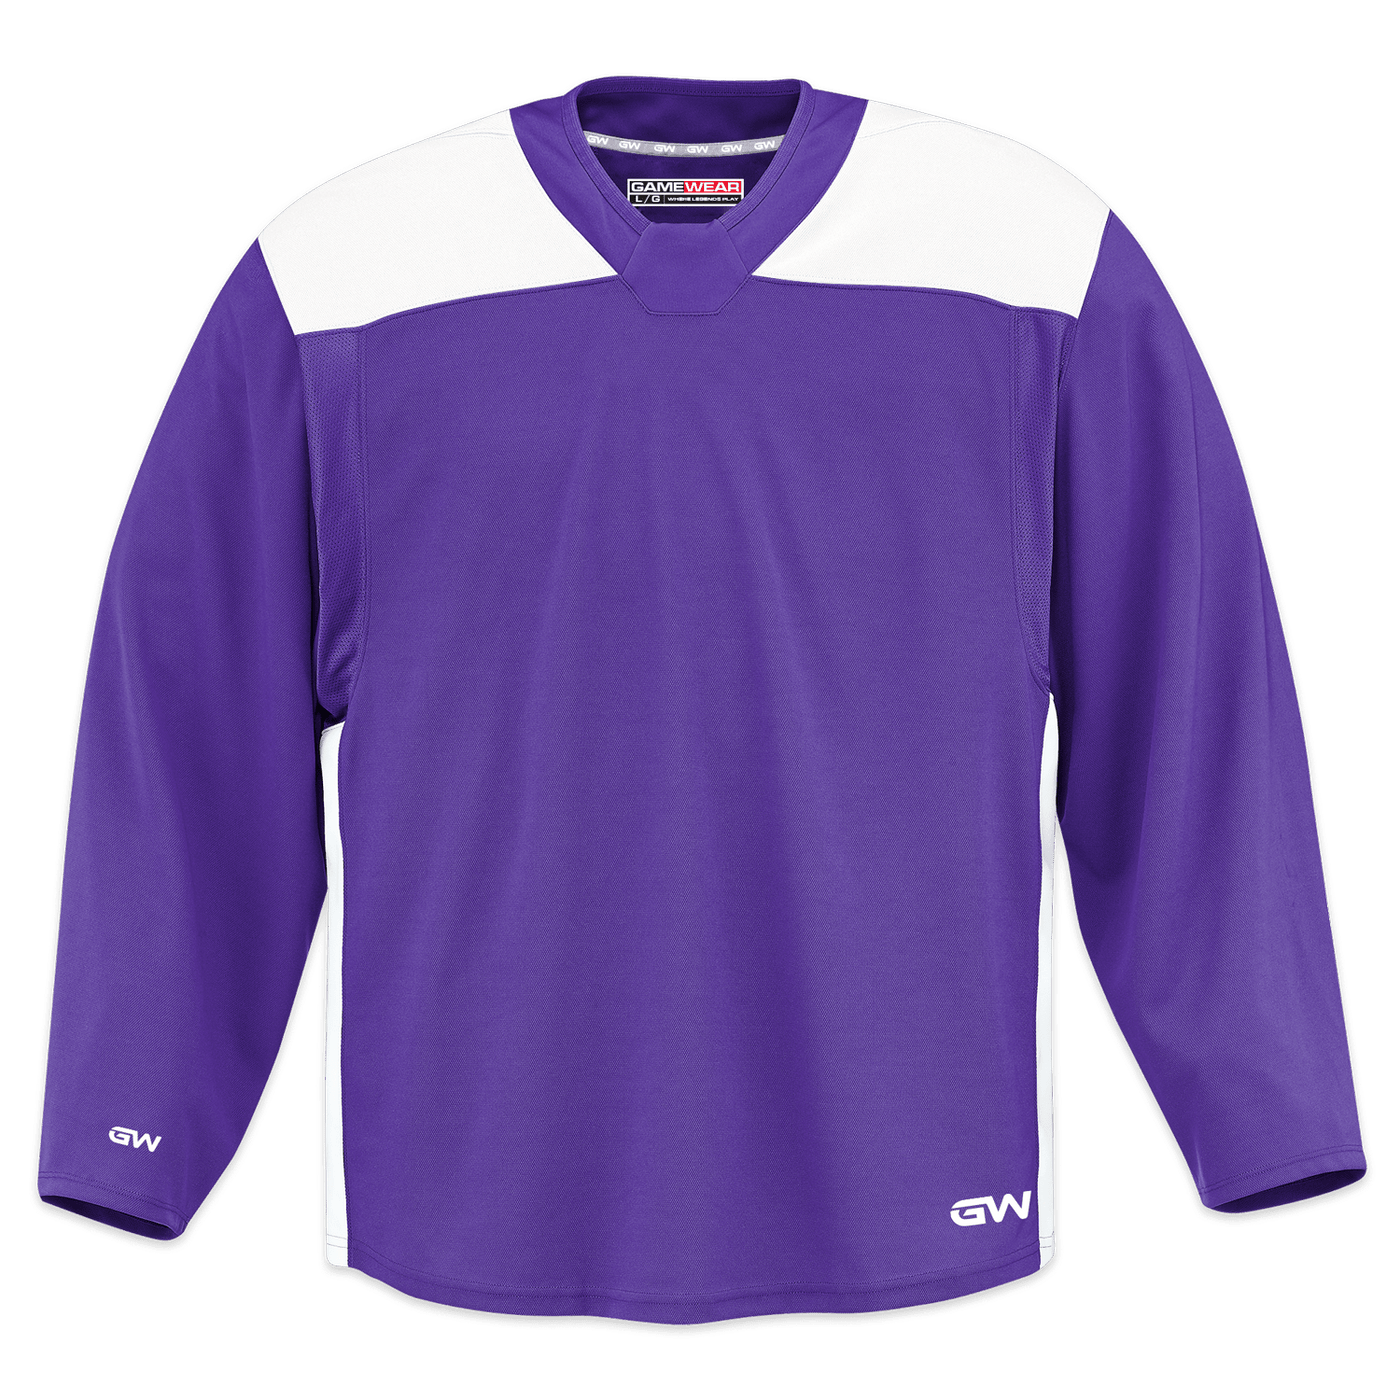 GameWear GW6500 ProLite Series Junior Hockey Practice Jersey - Violet / White - The Hockey Shop Source For Sports